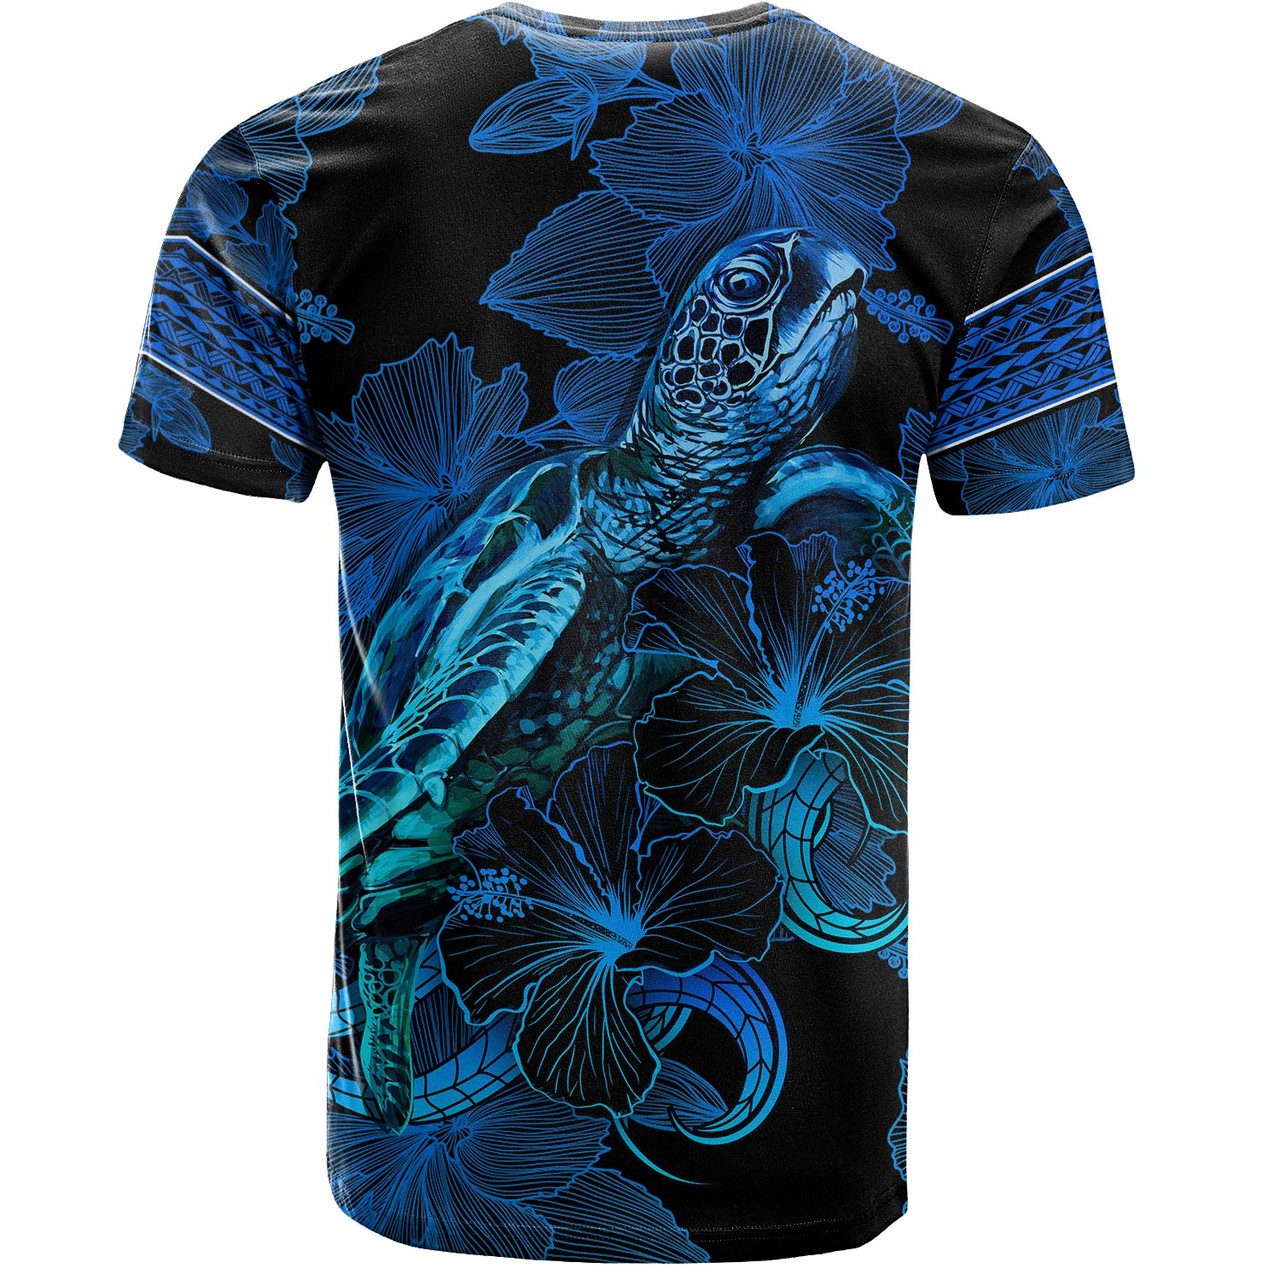 Solomon Islands T-Shirt Sea Turtle With Blooming Hibiscus Flowers Tribal Blue